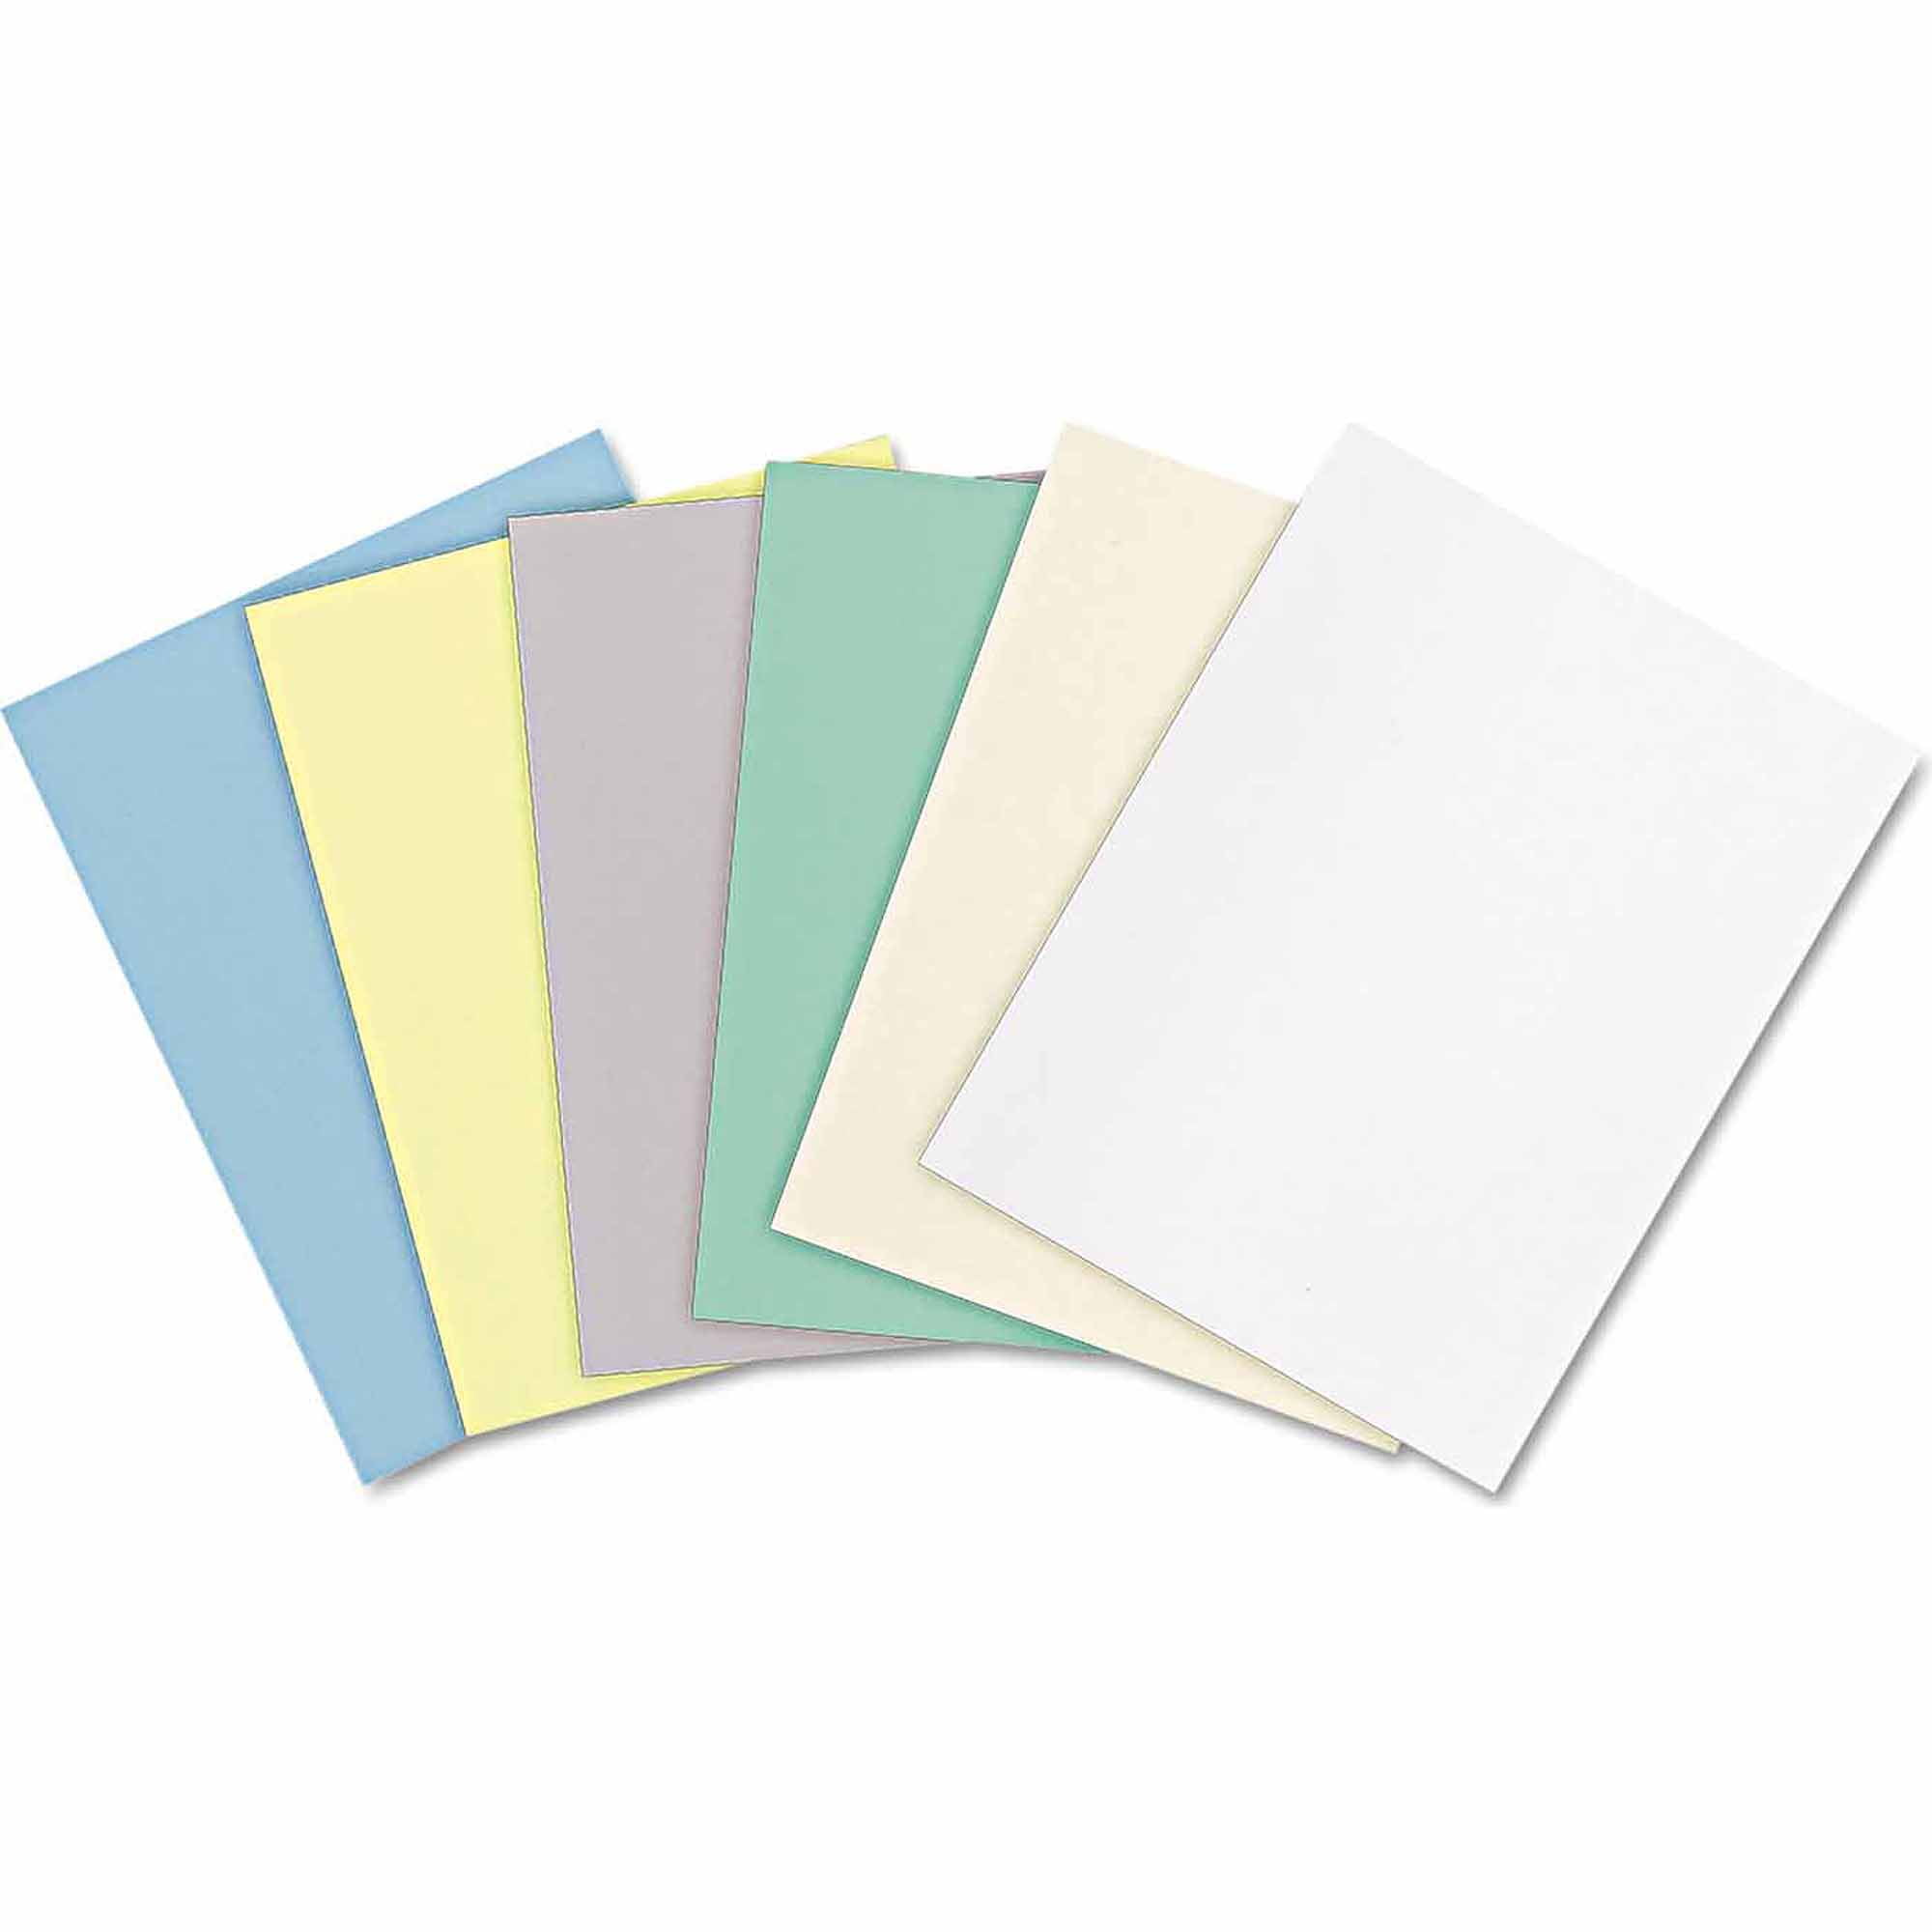 Photography Glossy White Paper 8.3x11.7 A4 Size 20 sheets weight 180gsm.  Dries Quickly best finish colors and Look Pictures print for all inkjet